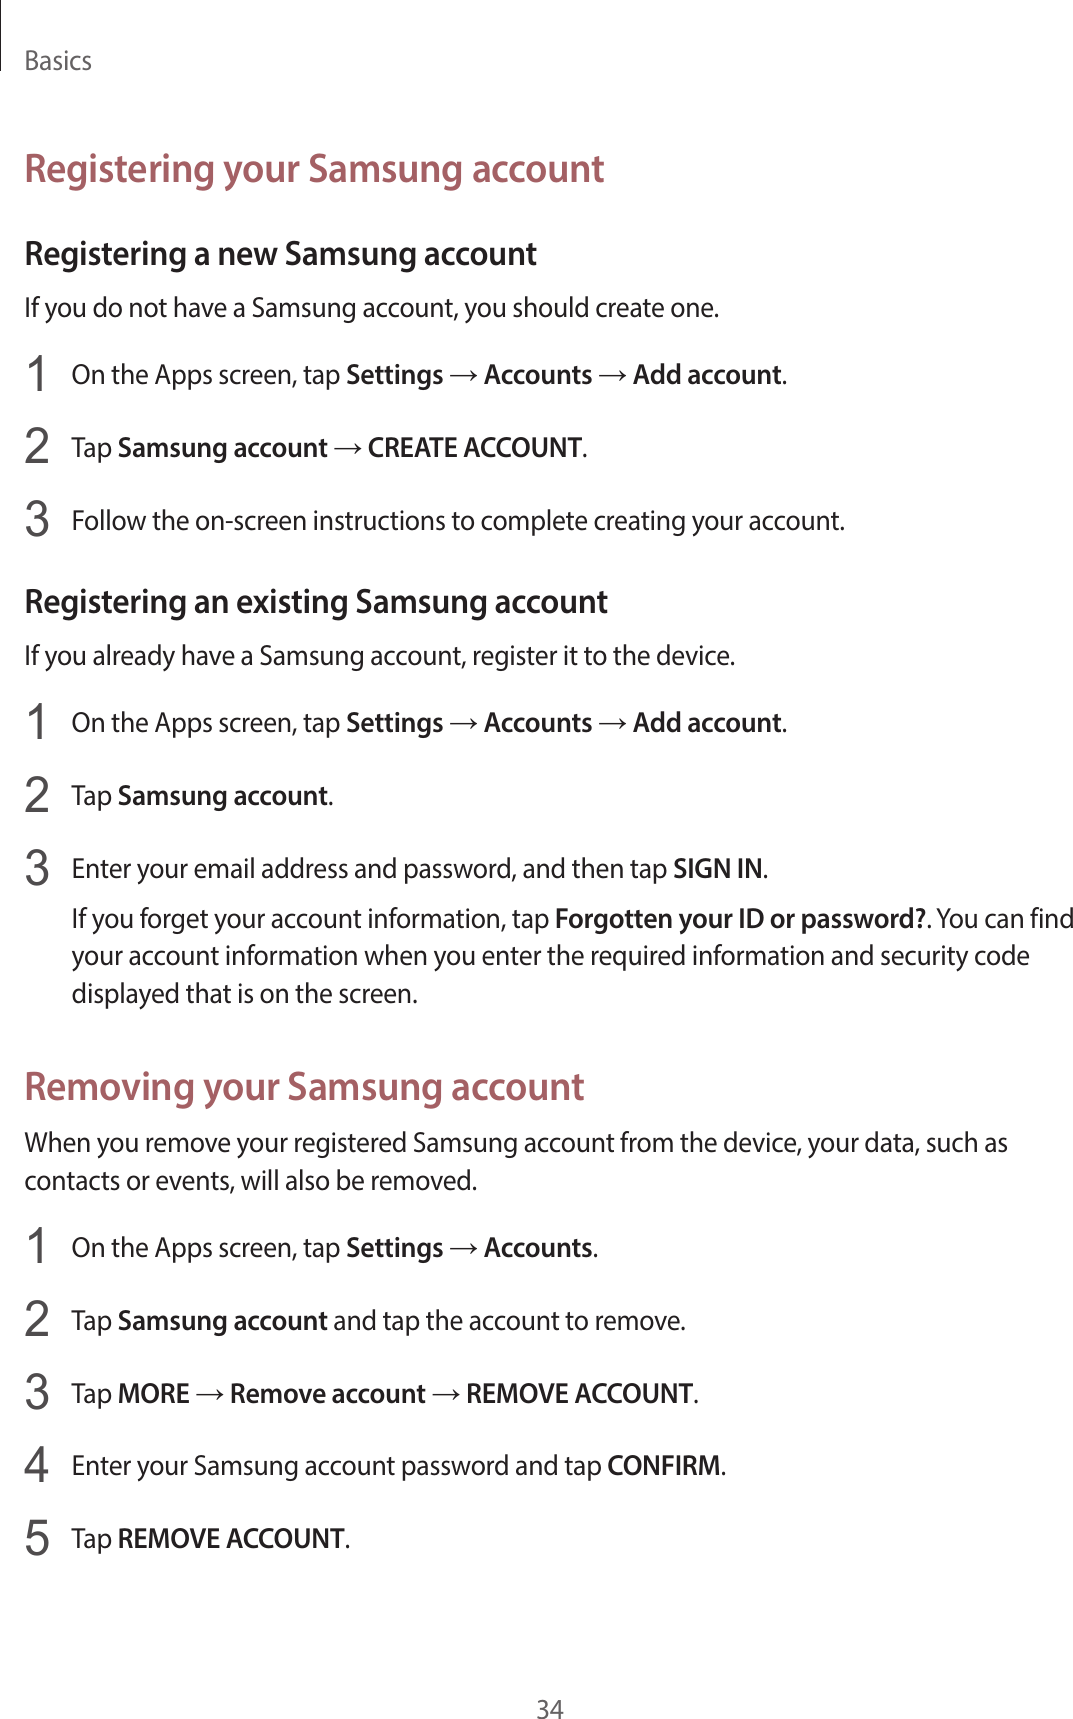 Basics34Registering your Samsung accountRegistering a new Samsung accountIf you do not have a Samsung account, you should create one.1  On the Apps screen, tap Settings → Accounts → Add account.2  Tap Samsung account → CREATE ACCOUNT.3  Follow the on-screen instructions to complete creating your account.Registering an existing Samsung accountIf you already have a Samsung account, register it to the device.1  On the Apps screen, tap Settings → Accounts → Add account.2  Tap Samsung account.3  Enter your email address and password, and then tap SIGN IN.If you forget your account information, tap Forgotten your ID or password?. You can find your account information when you enter the required information and security code displayed that is on the screen.Removing your Samsung accountWhen you remove your registered Samsung account from the device, your data, such as contacts or events, will also be removed.1  On the Apps screen, tap Settings → Accounts.2  Tap Samsung account and tap the account to remove.3  Tap MORE → Remove account → REMOVE ACCOUNT.4  Enter your Samsung account password and tap CONFIRM.5  Tap REMOVE ACCOUNT.